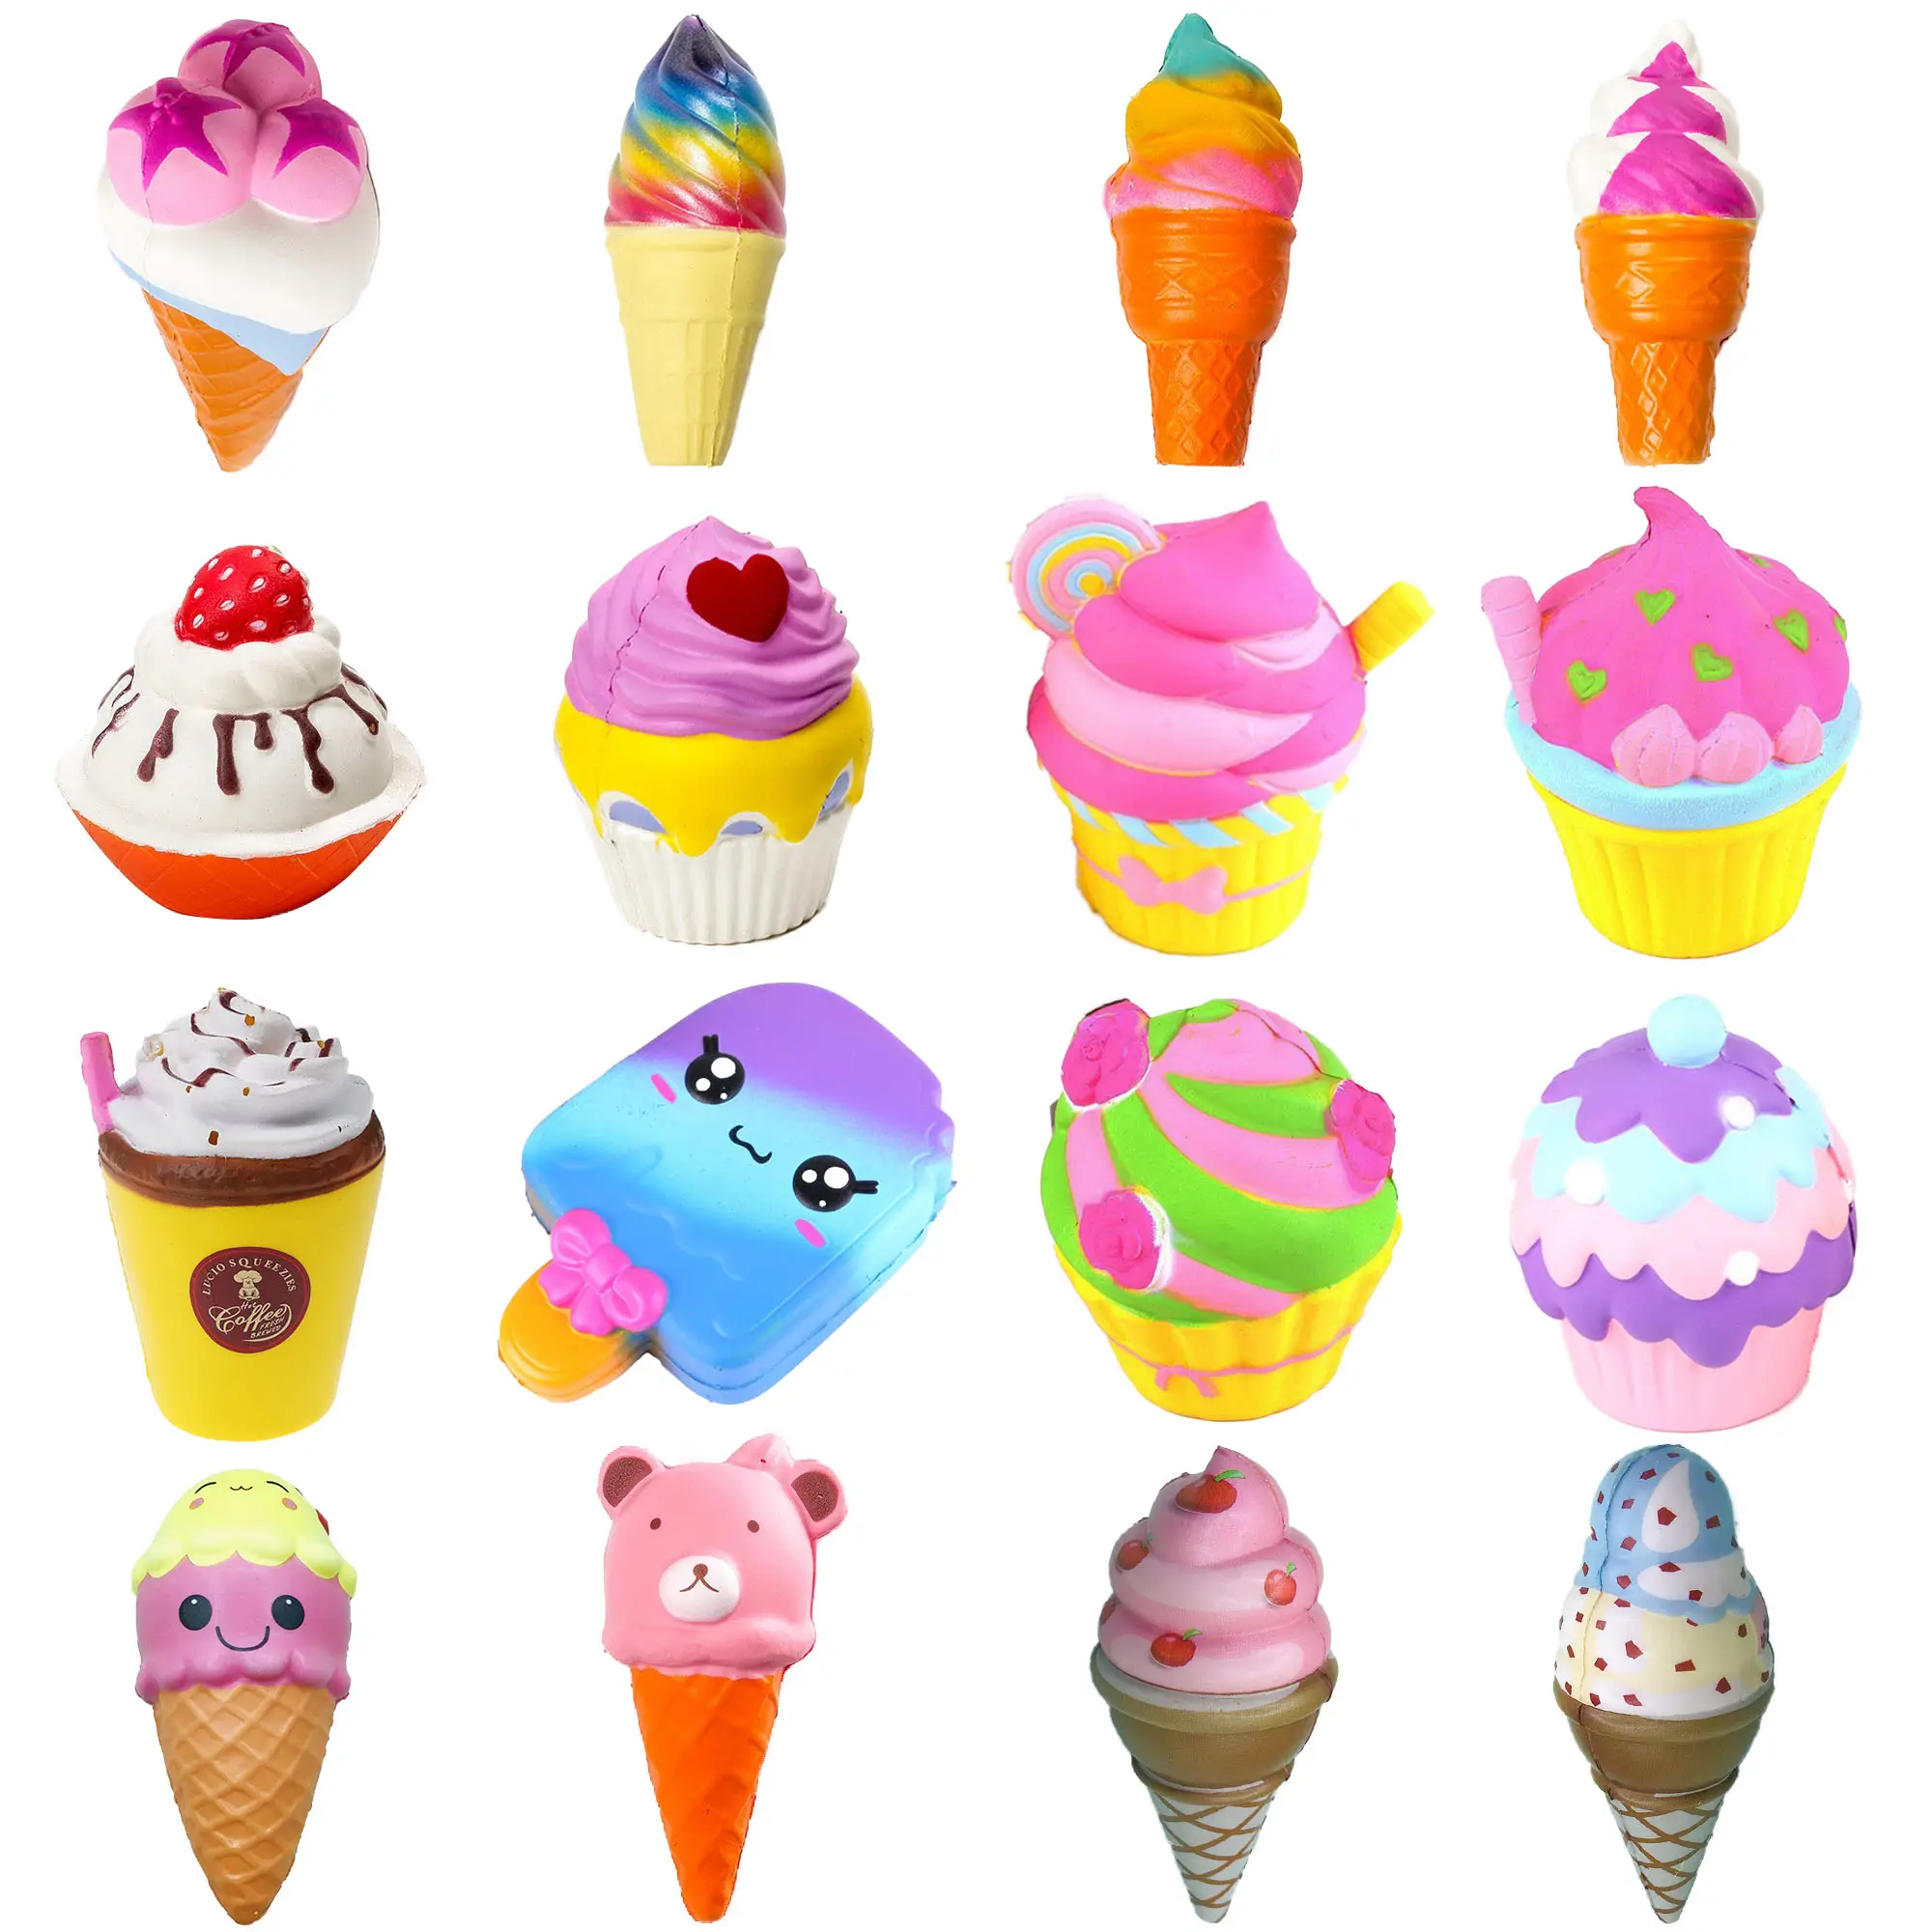 China Factory custom display box Kawaii Pu Foam Slow Food Ice cream Squeeze Toy Slow Rising Scented Cute Squishy set meal